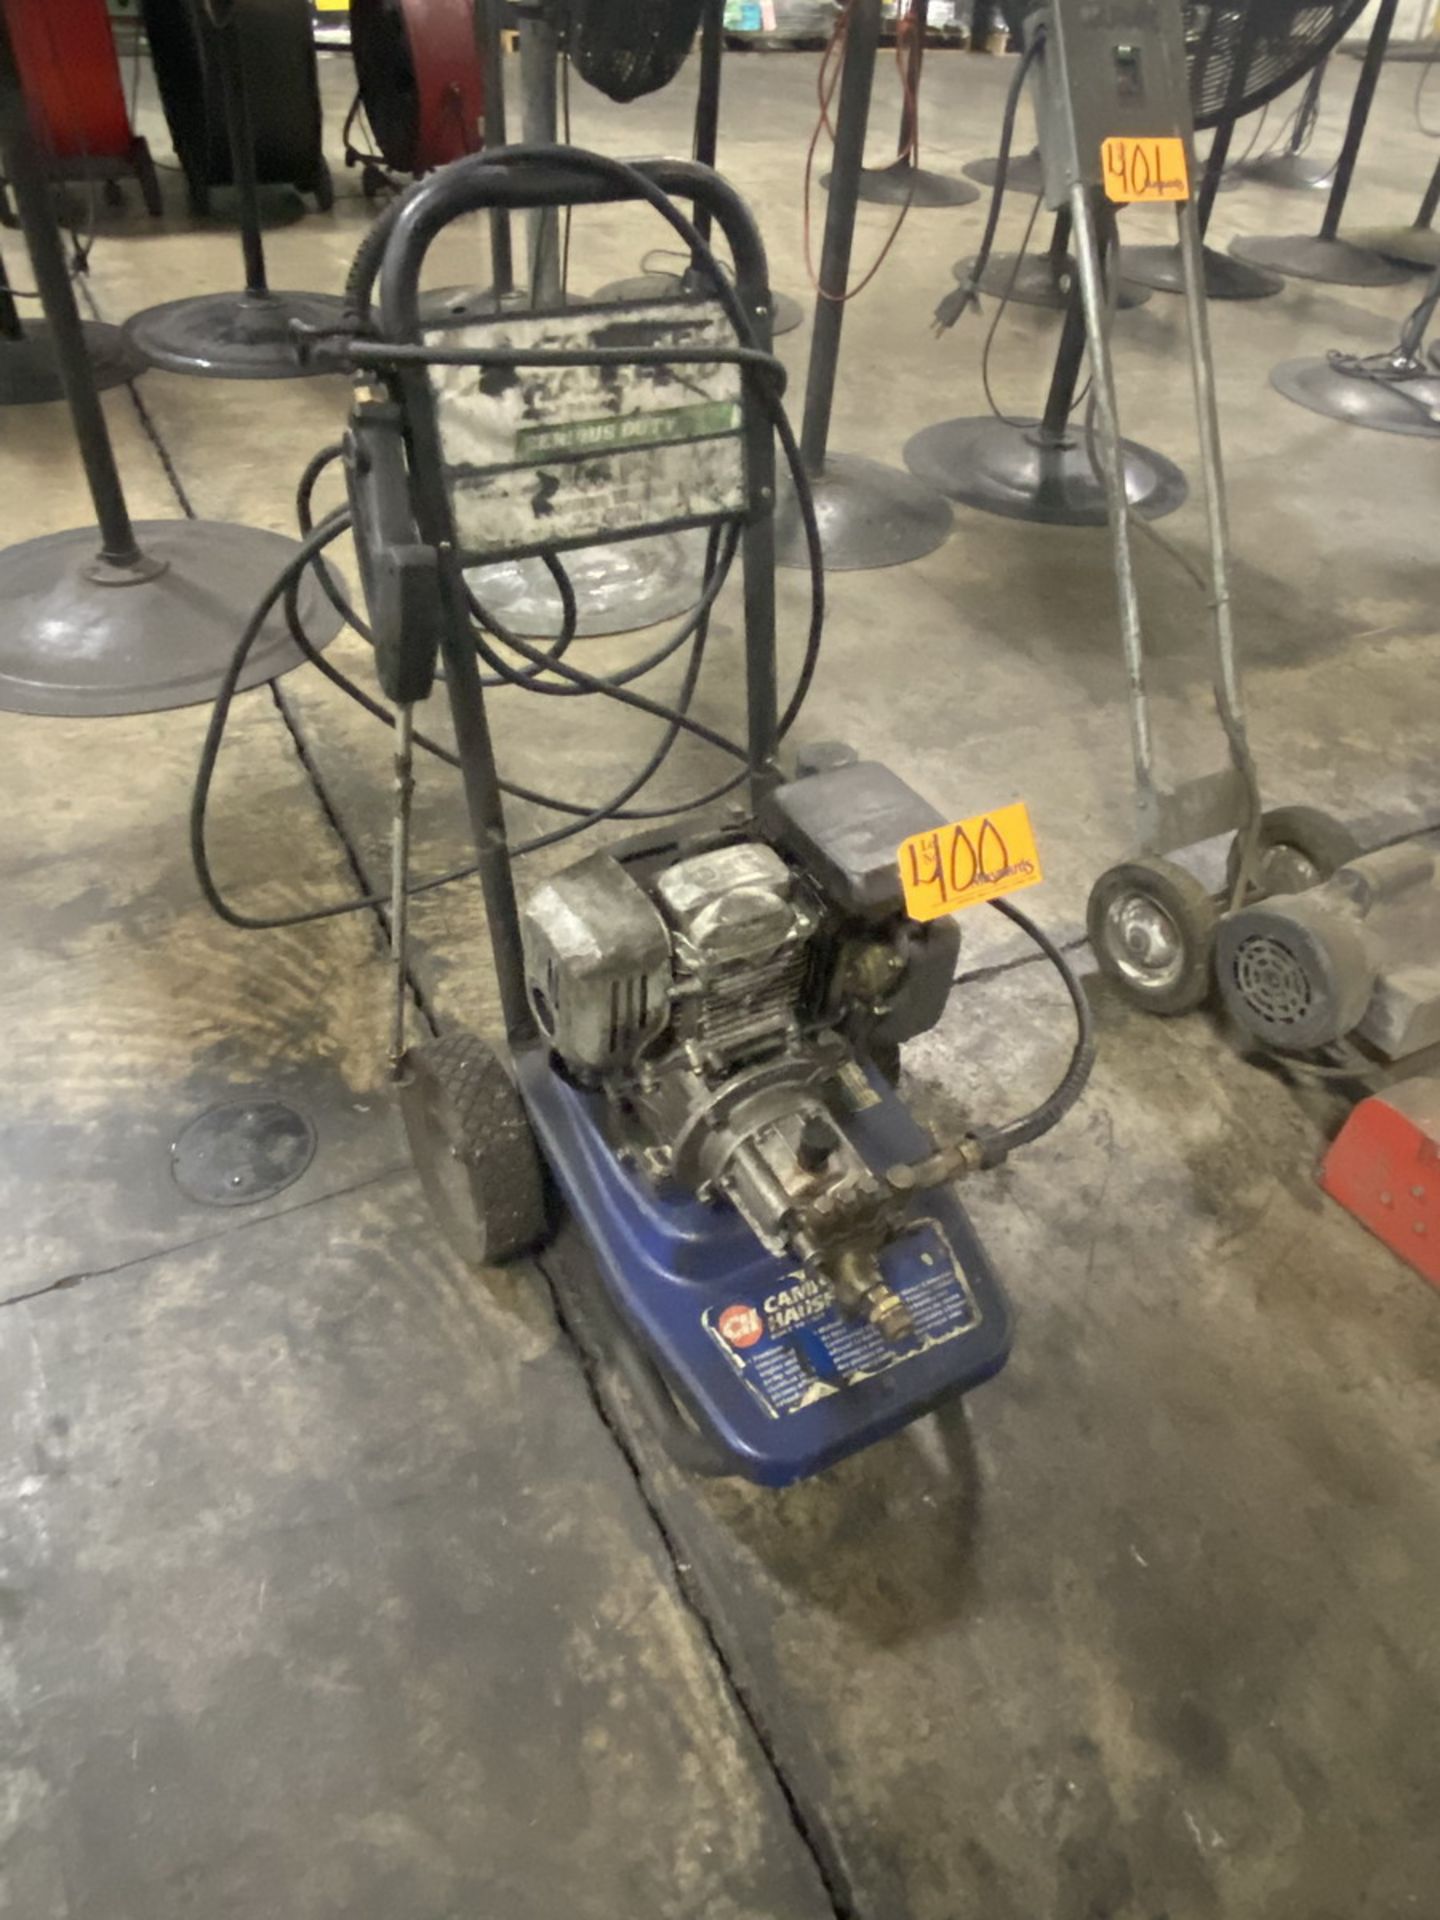 Campbell Hausfeld Pressure Washer 2400PSI, 2.2GPM - Image 2 of 2